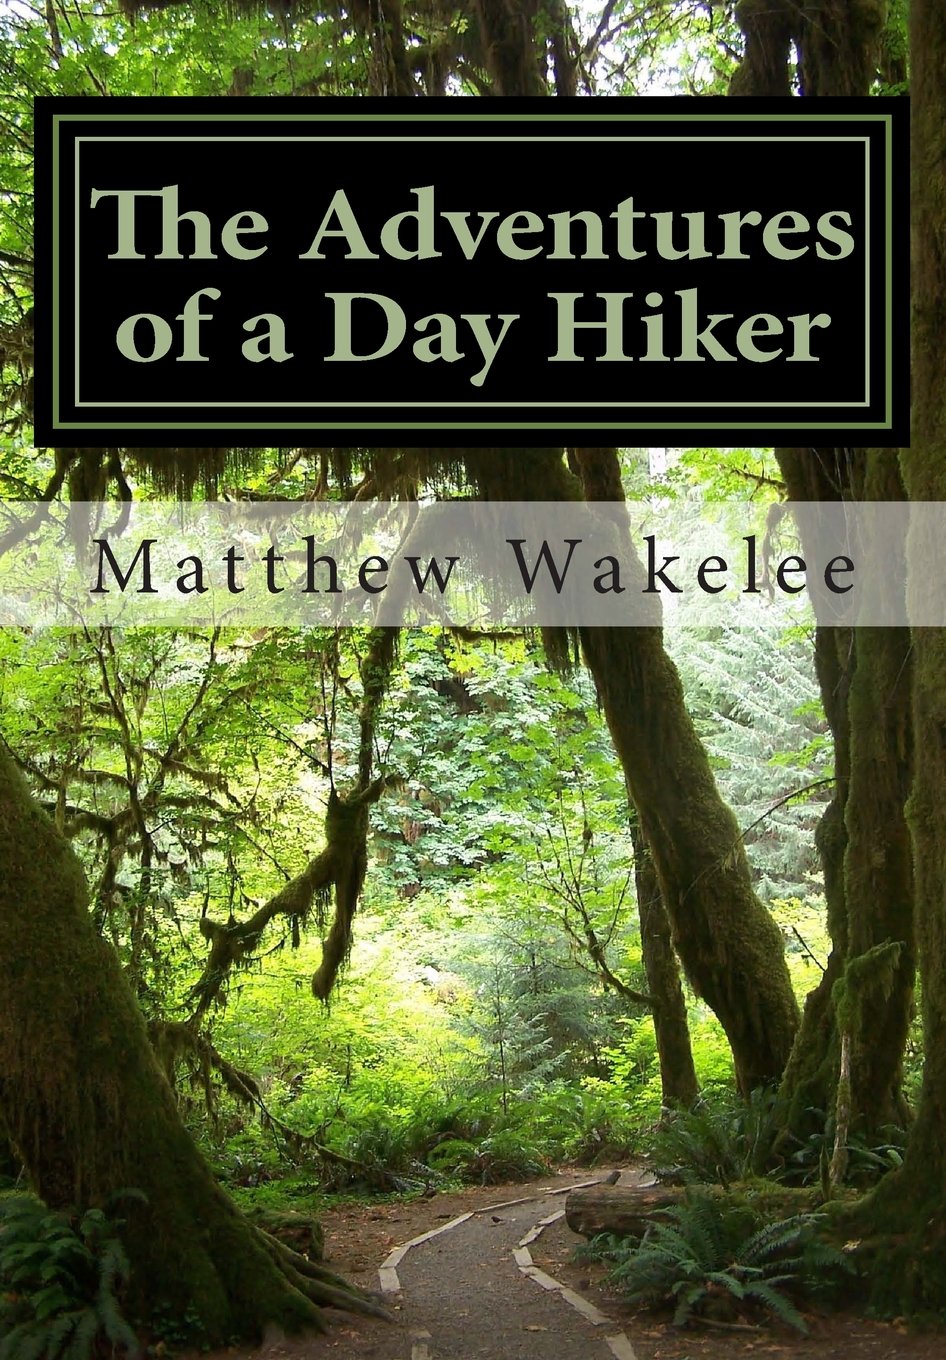 The Adventures of a Day Hiker